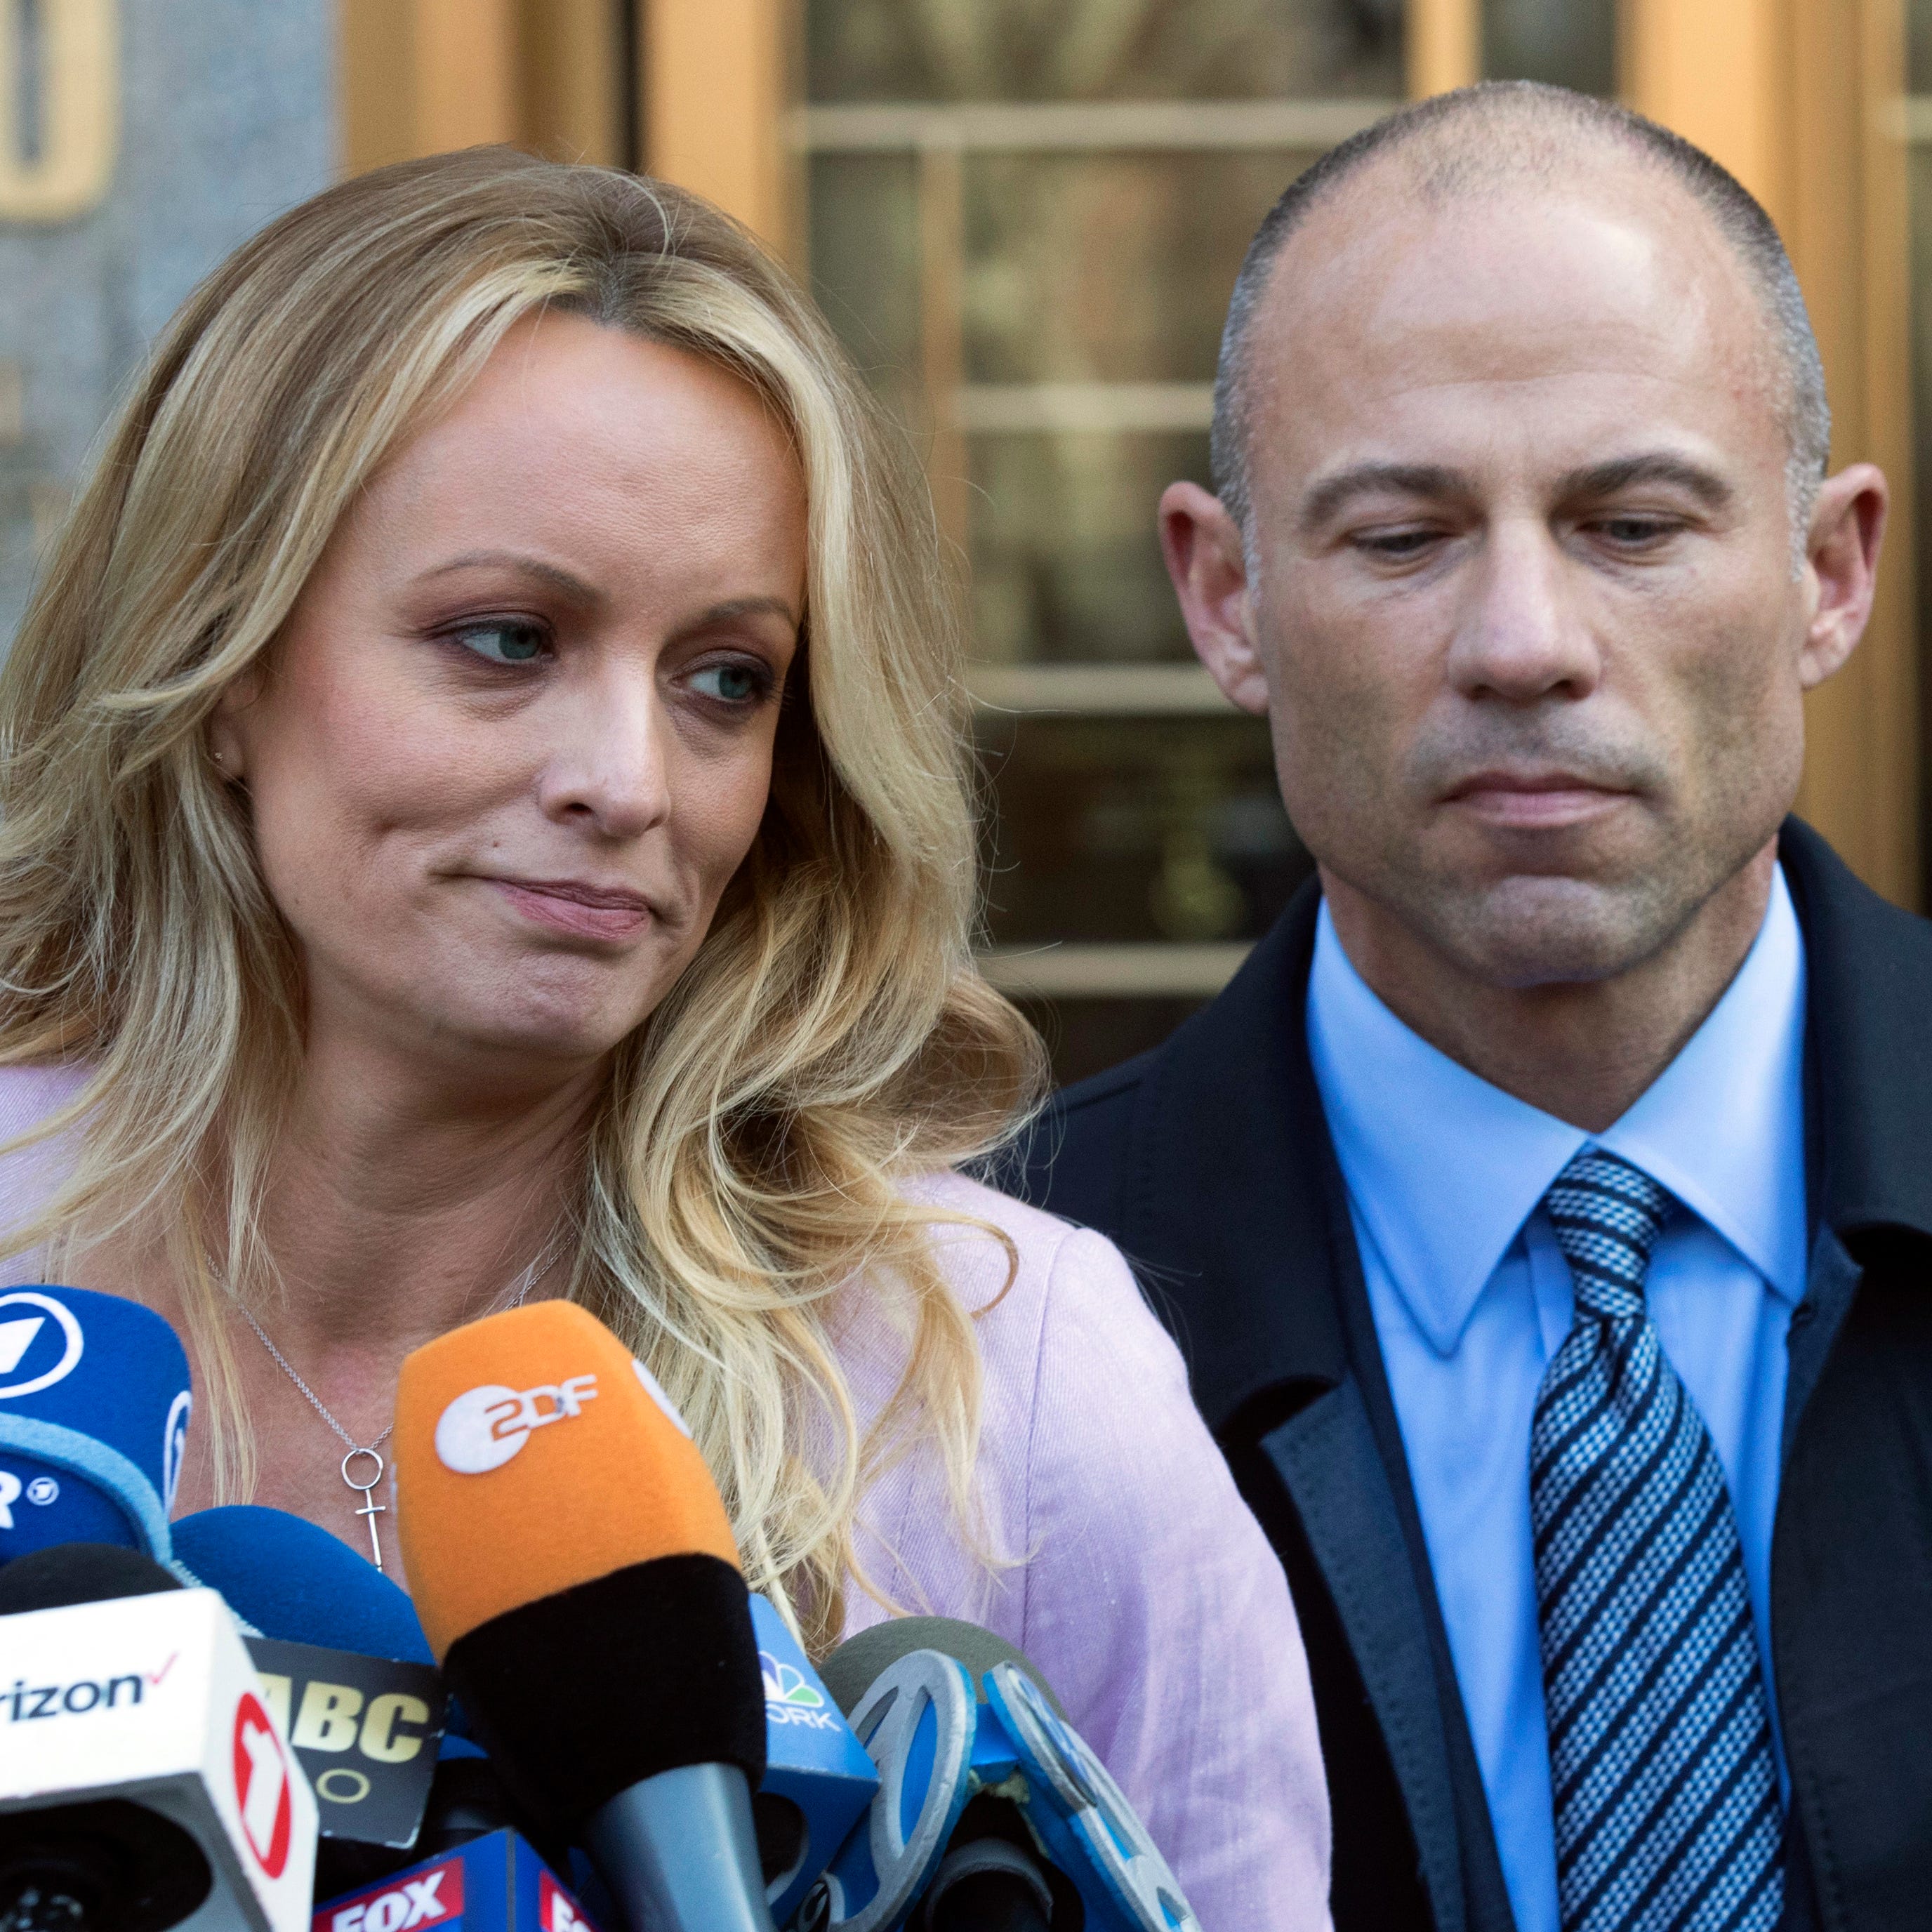 Adult film actress Stormy Daniels, left, stands with her lawyer Michael Avenatti as she speaks outside federal court Monday,